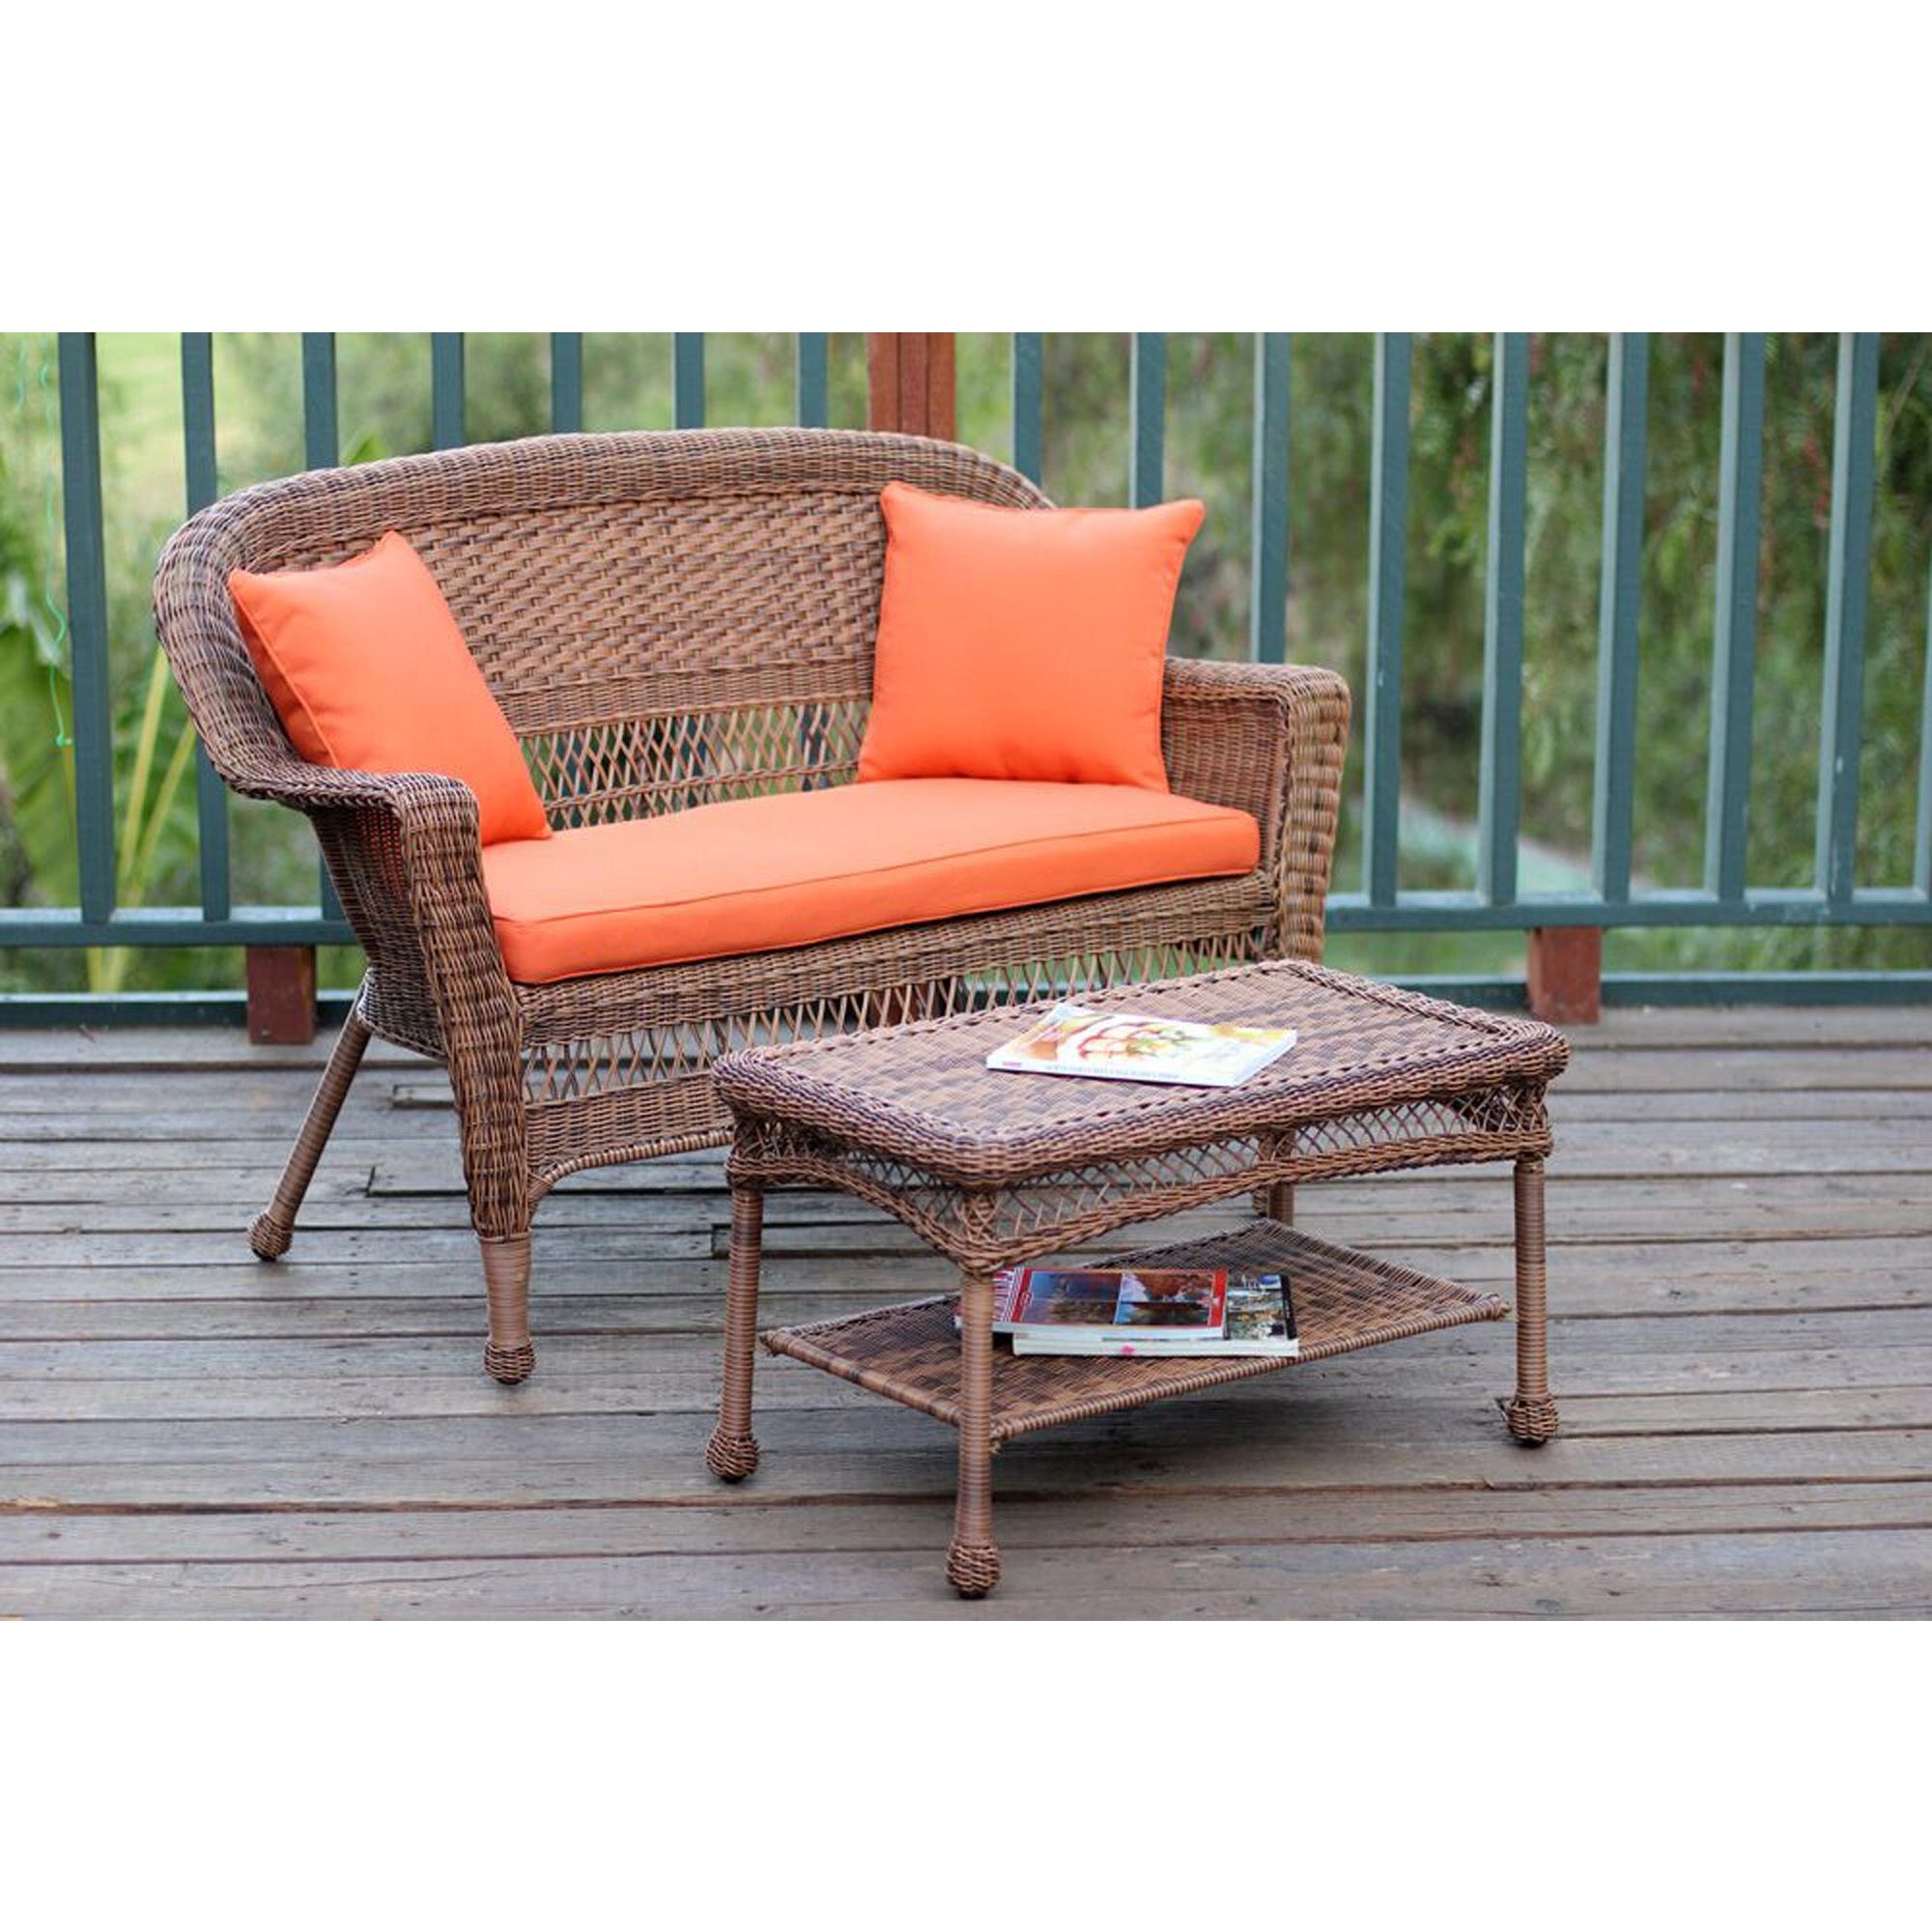 2 Piece Oswald Honey Wicker Patio Loveseat And Coffee Table Set Intended For Well Known Outdoor Wicker Orange Cushion Patio Sets (View 3 of 15)